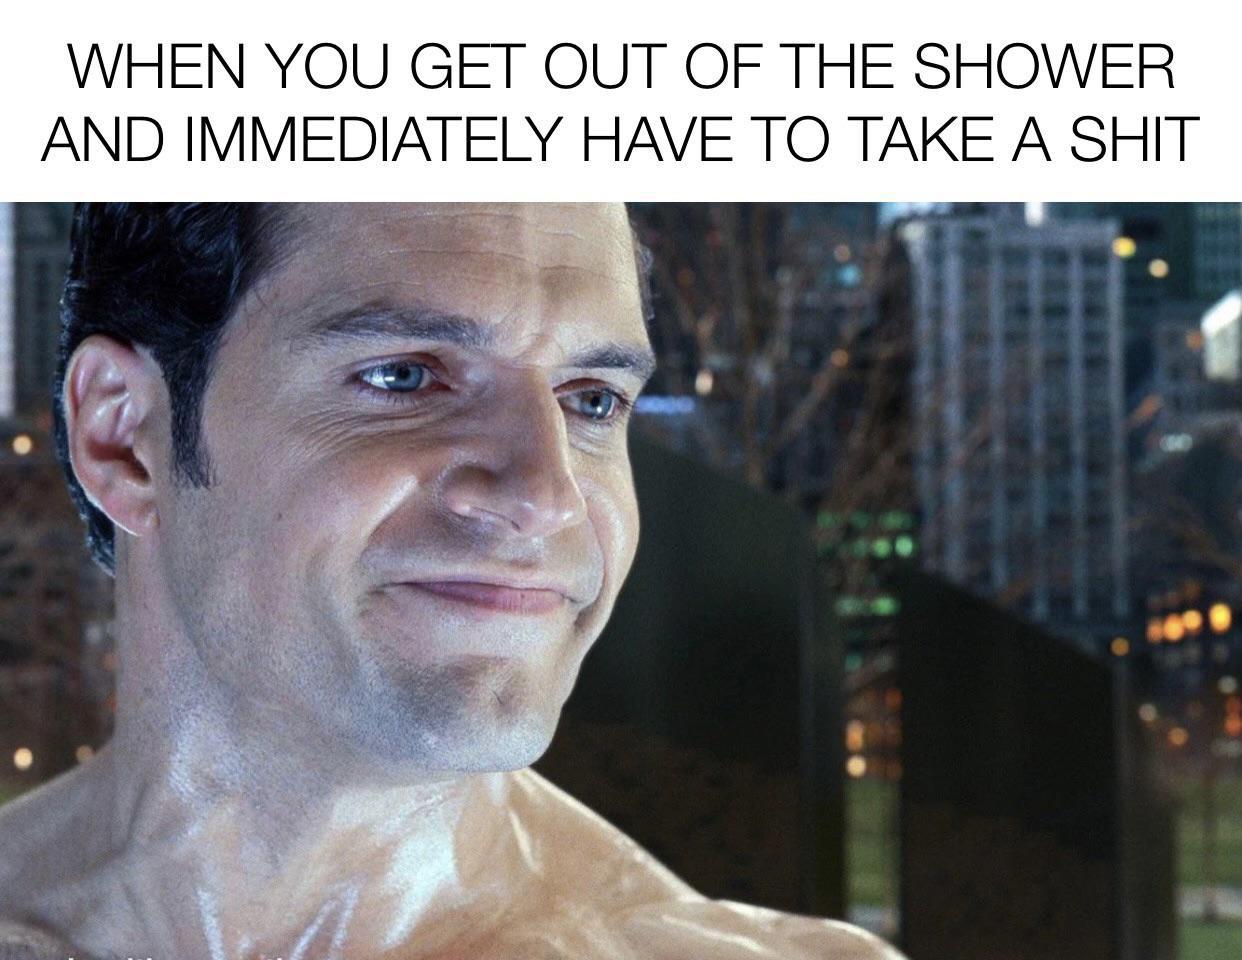 daily dose of pics - henry cavill toilet meme - When You Get Out Of The Shower And Immediately Have To Take A Shit